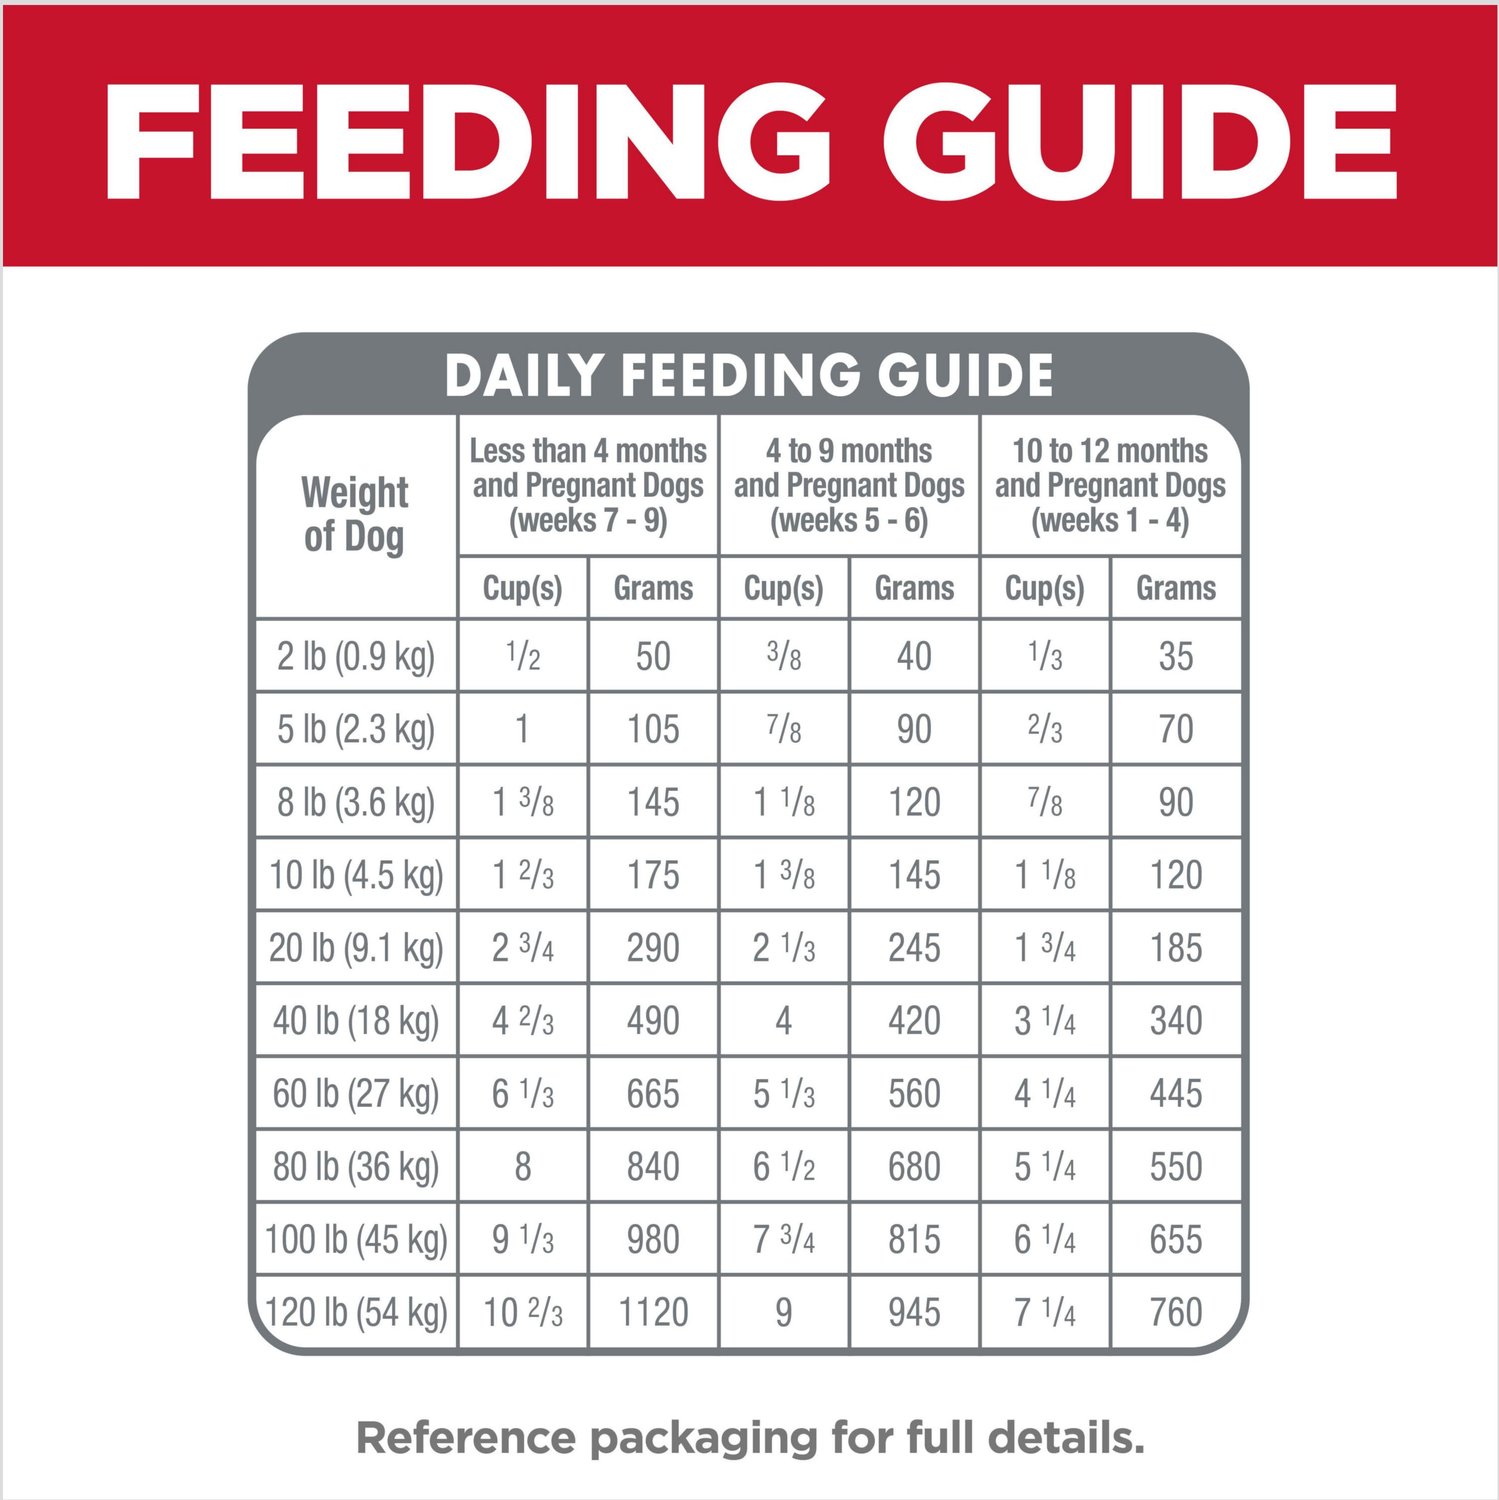 hill's science diet puppy feeding guide